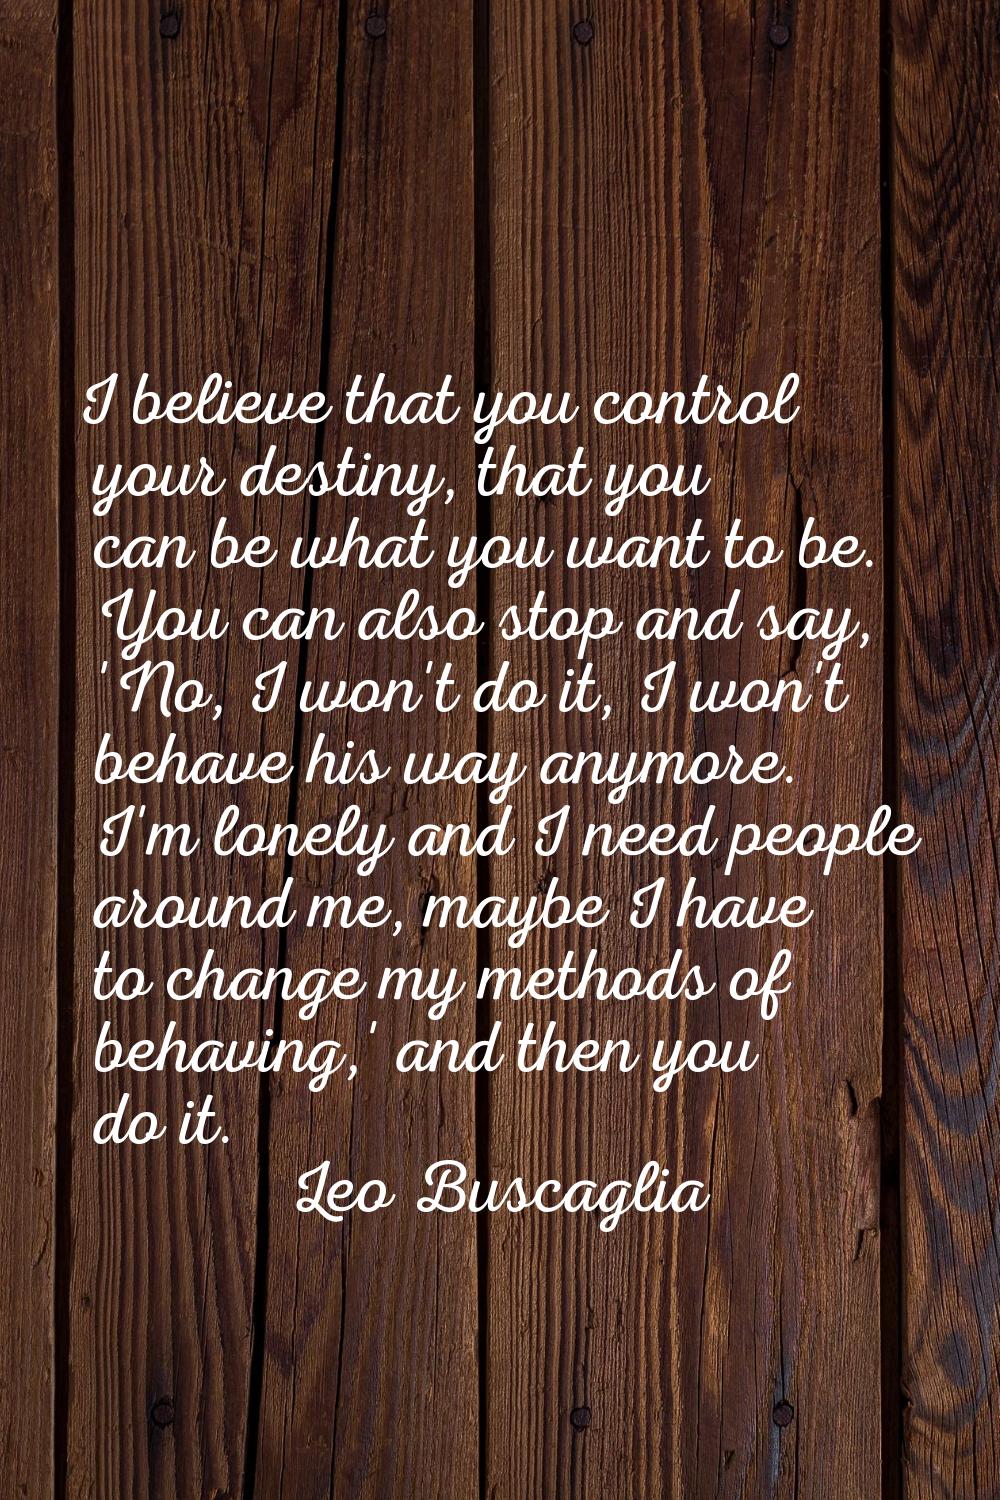 I believe that you control your destiny, that you can be what you want to be. You can also stop and